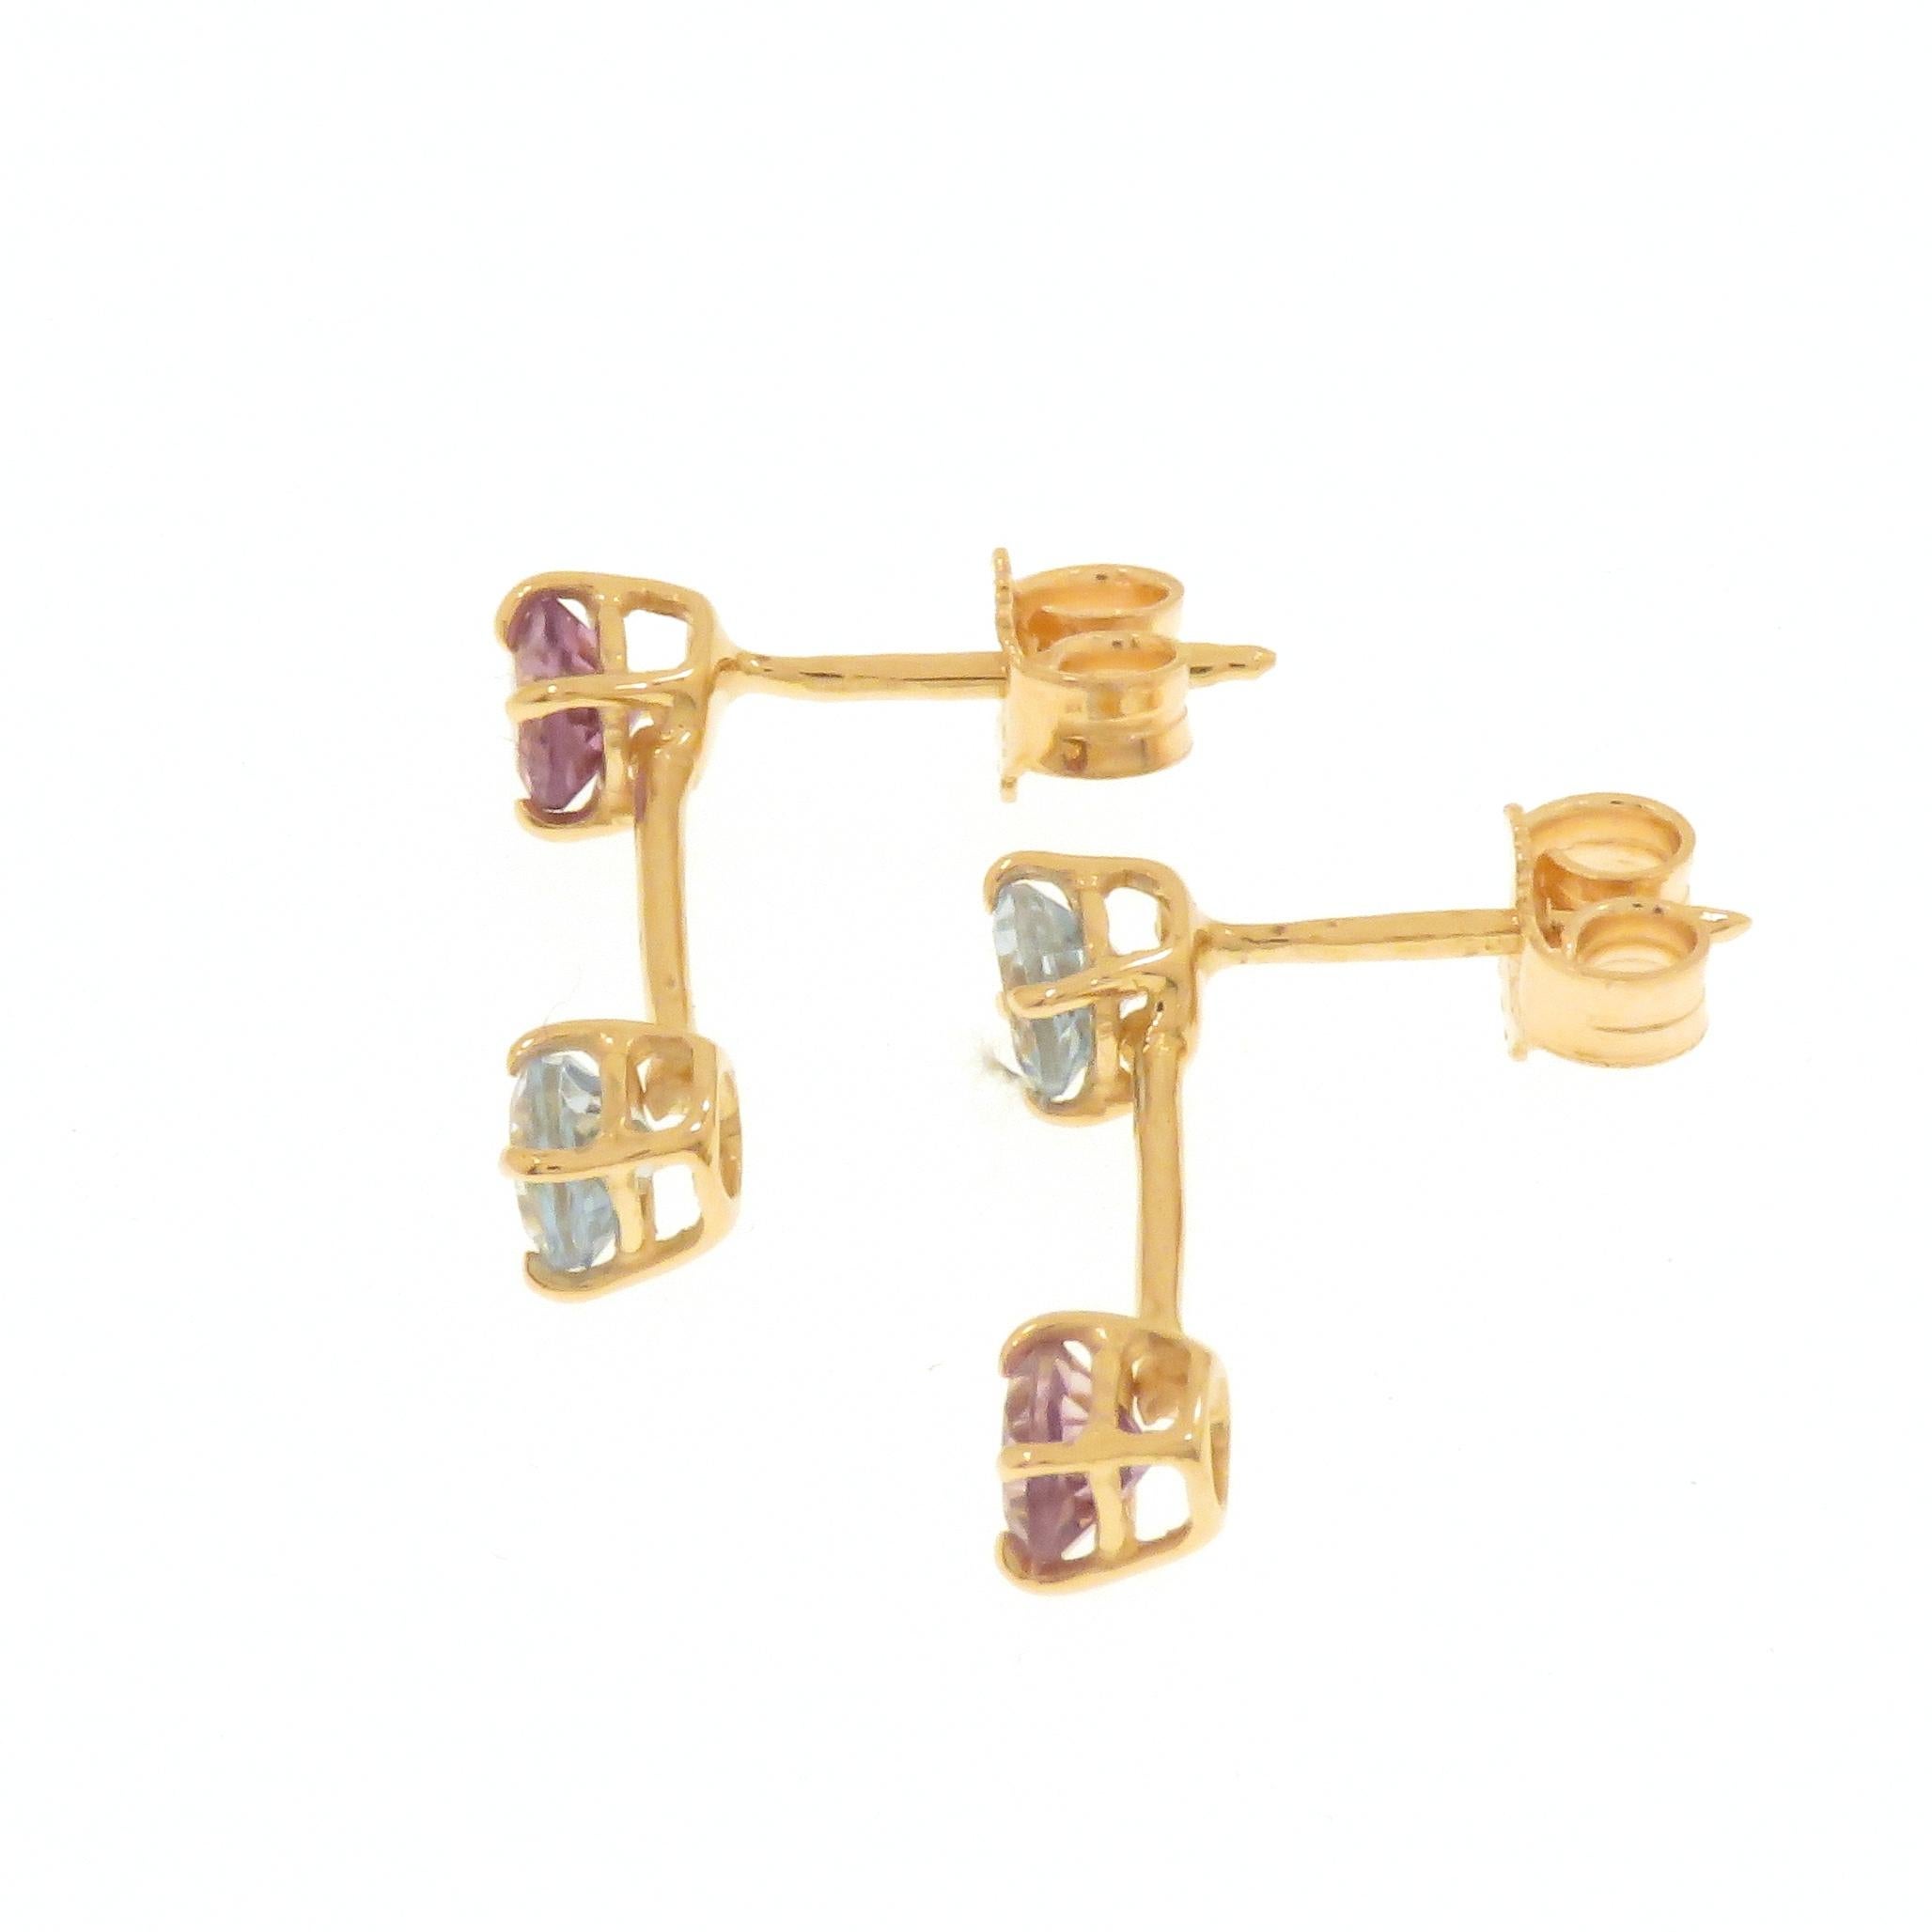 Earrings handmade in 9 carat rose gold with brilliant cut amethyst and blue topaz, diameter 0.157 inches. 

Total weight: 1.6 gram.

Marked with 9 carat gold mark and Botta Gioielli Italian mark 716MI.

Handmade in: 9 carat rose gold.
2 brilliant